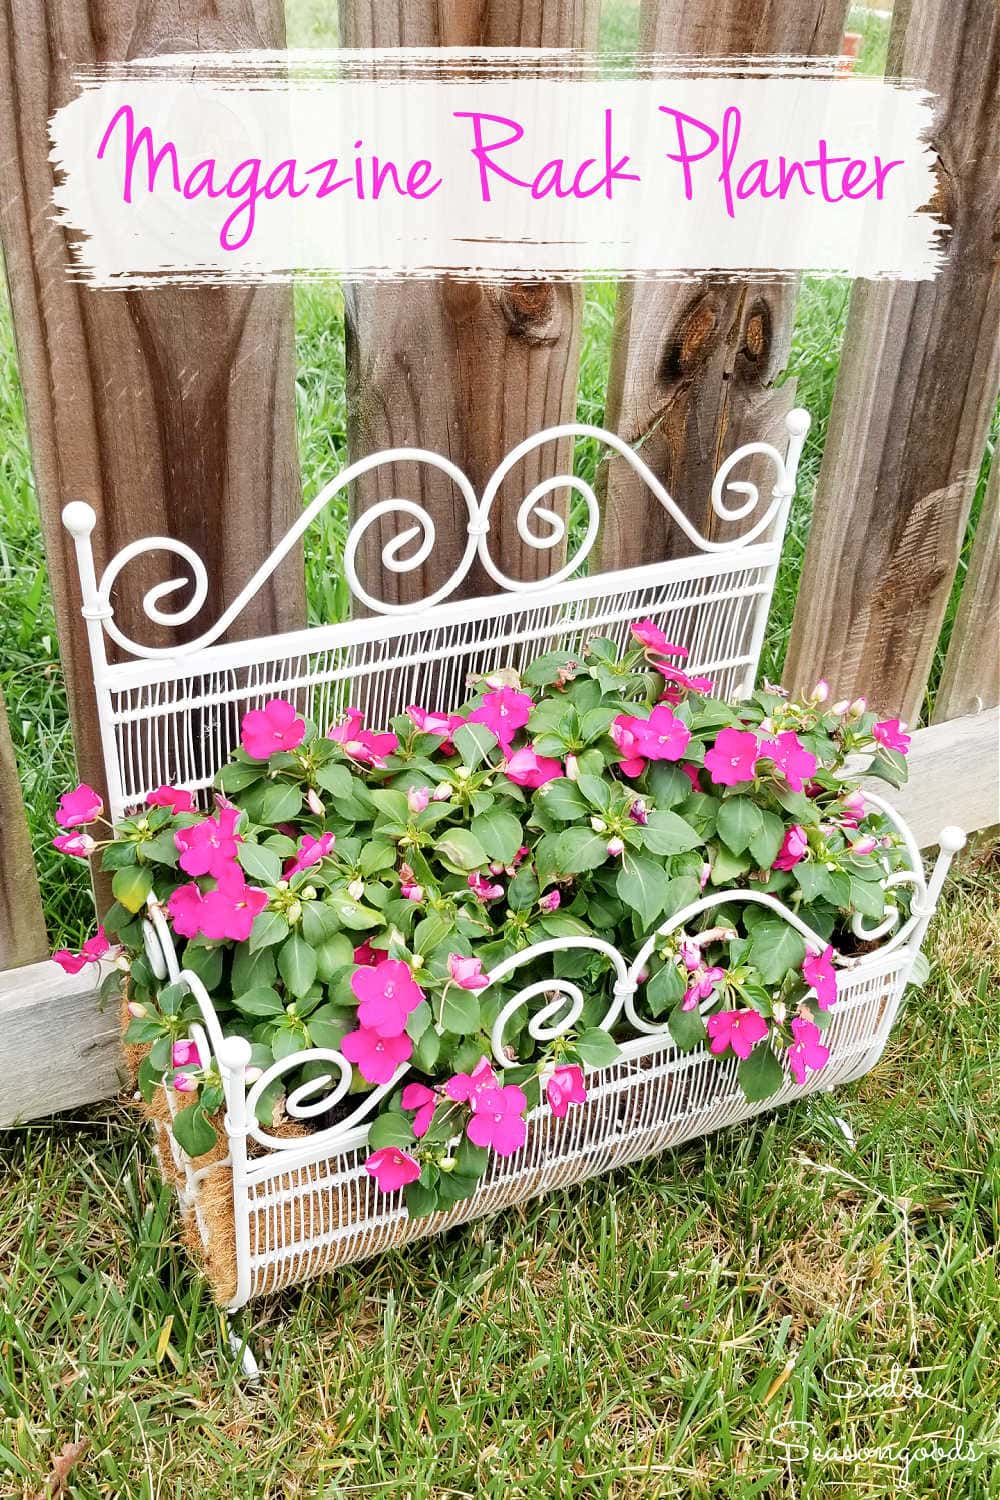 whimsical planter from a magazine rack